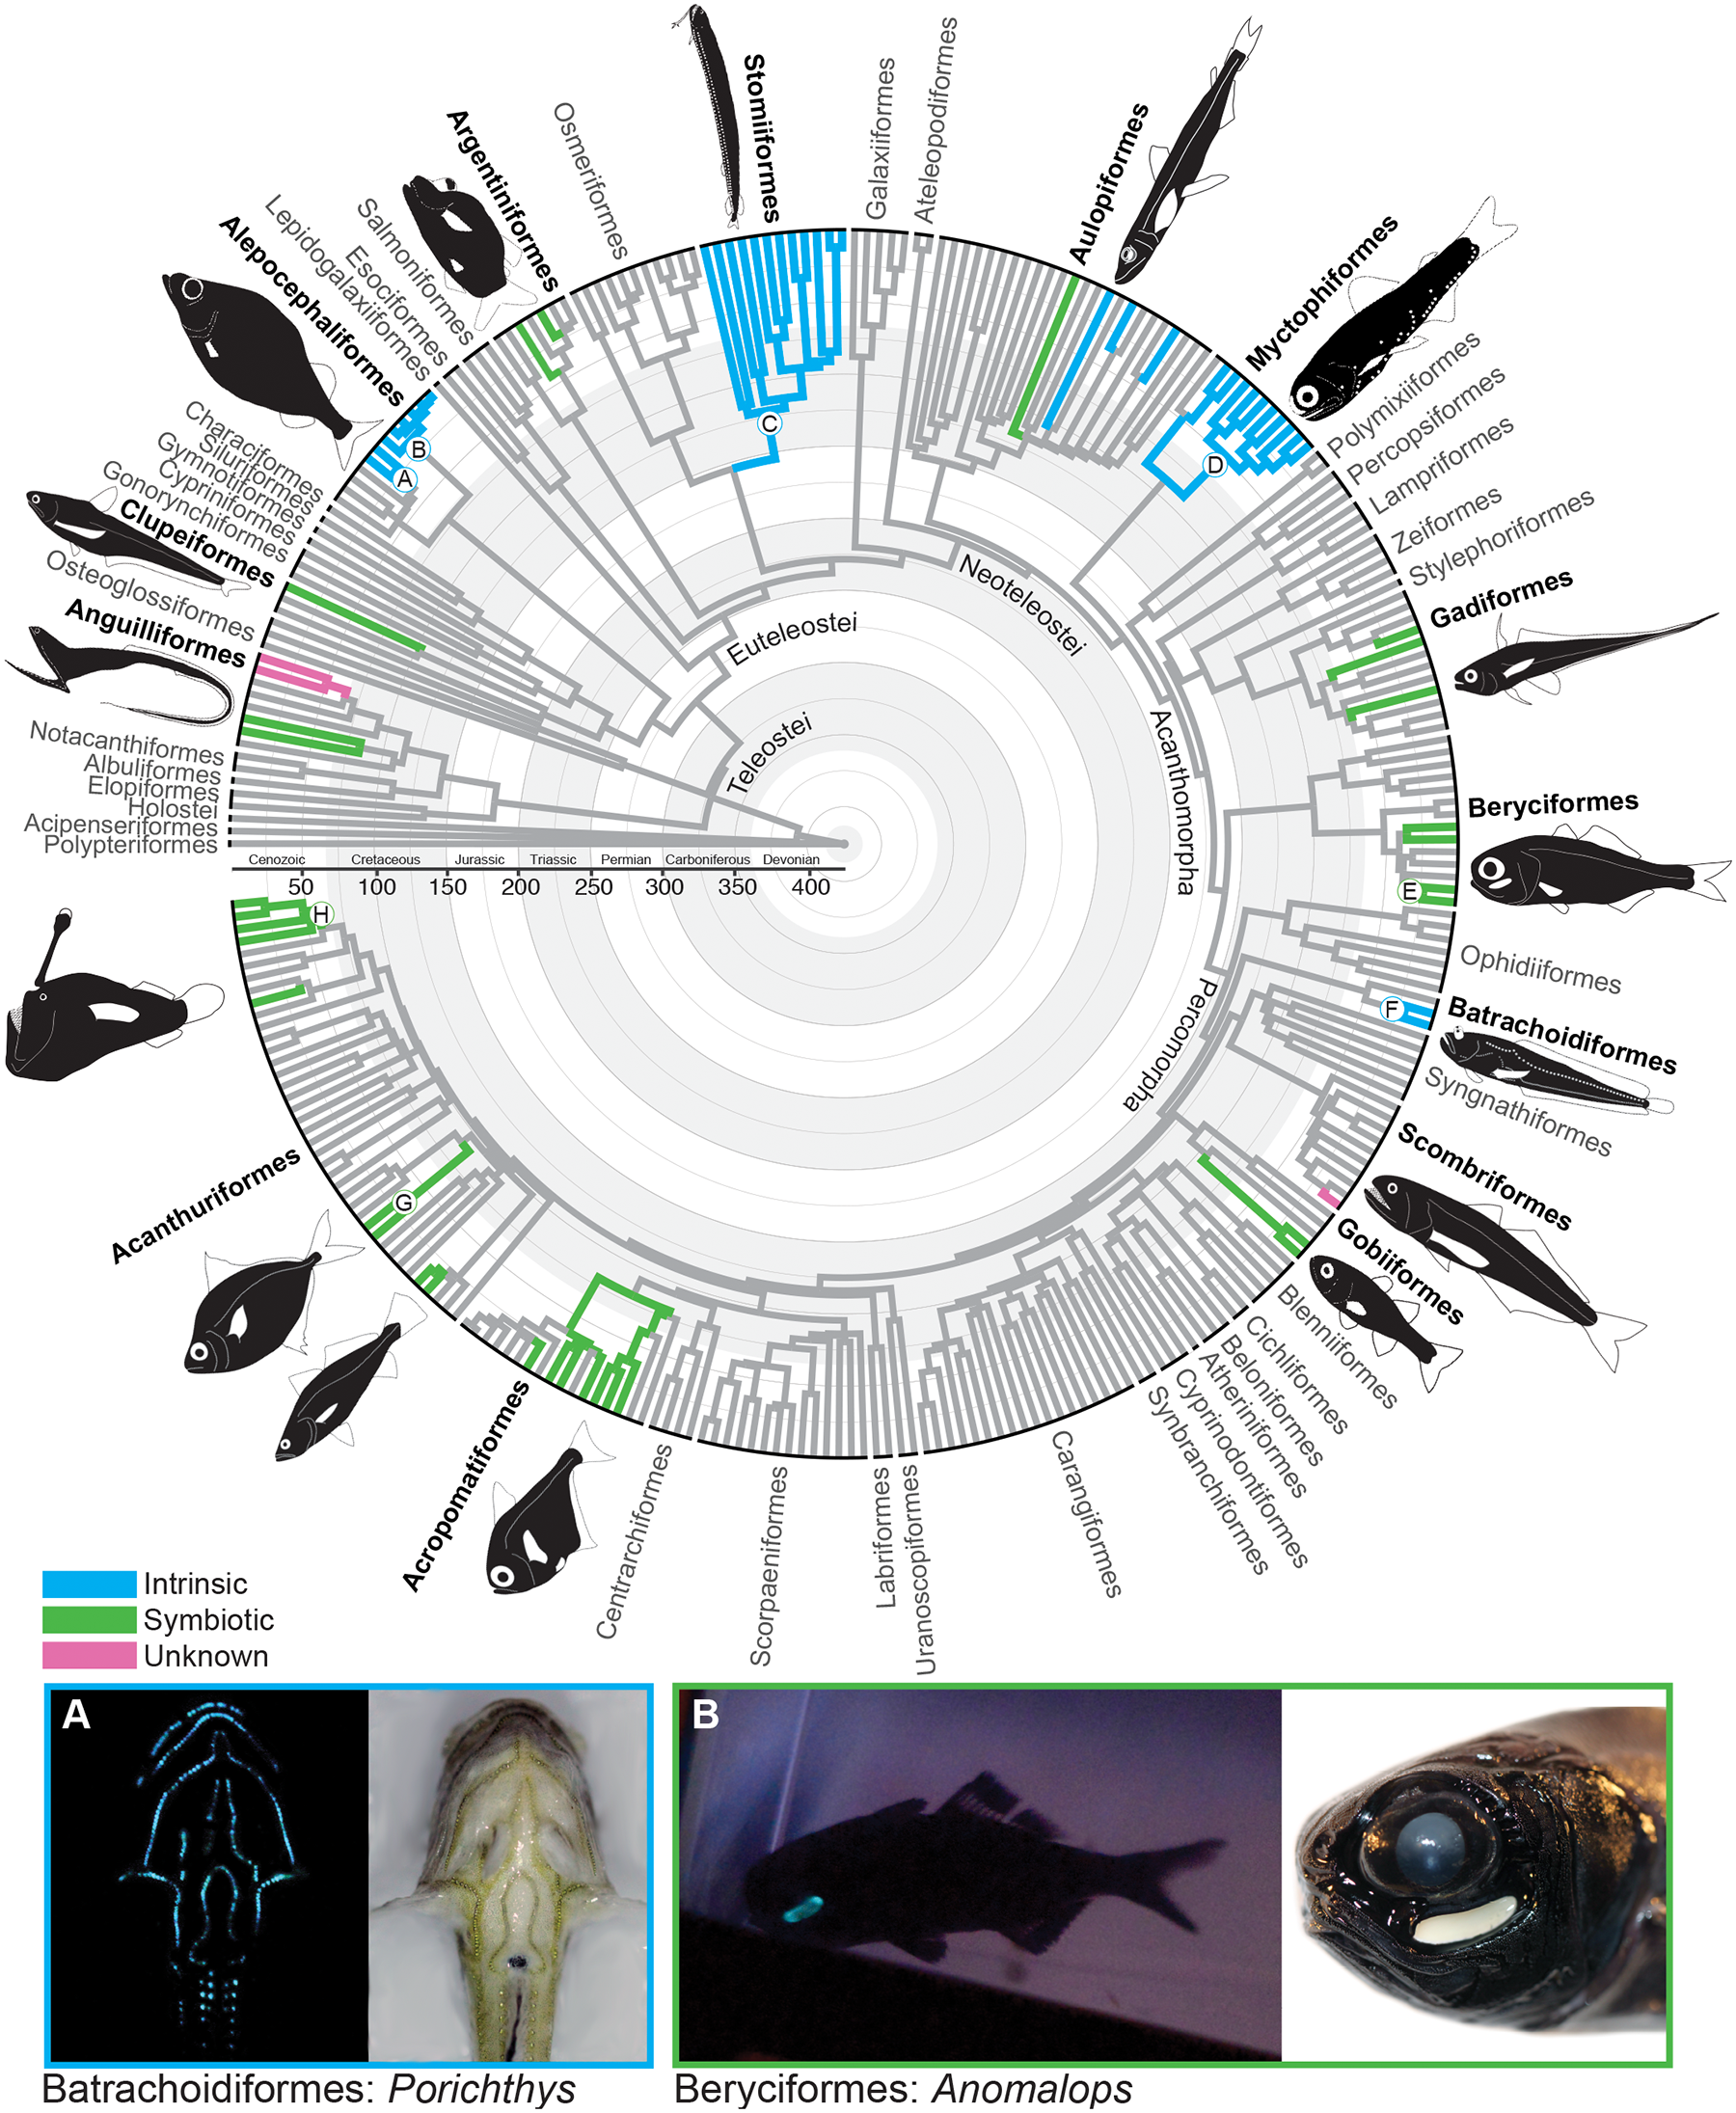 Tree of fish species showing phylogenetic distribution of bioluminescence; image also includes photographic examples of several fish species.